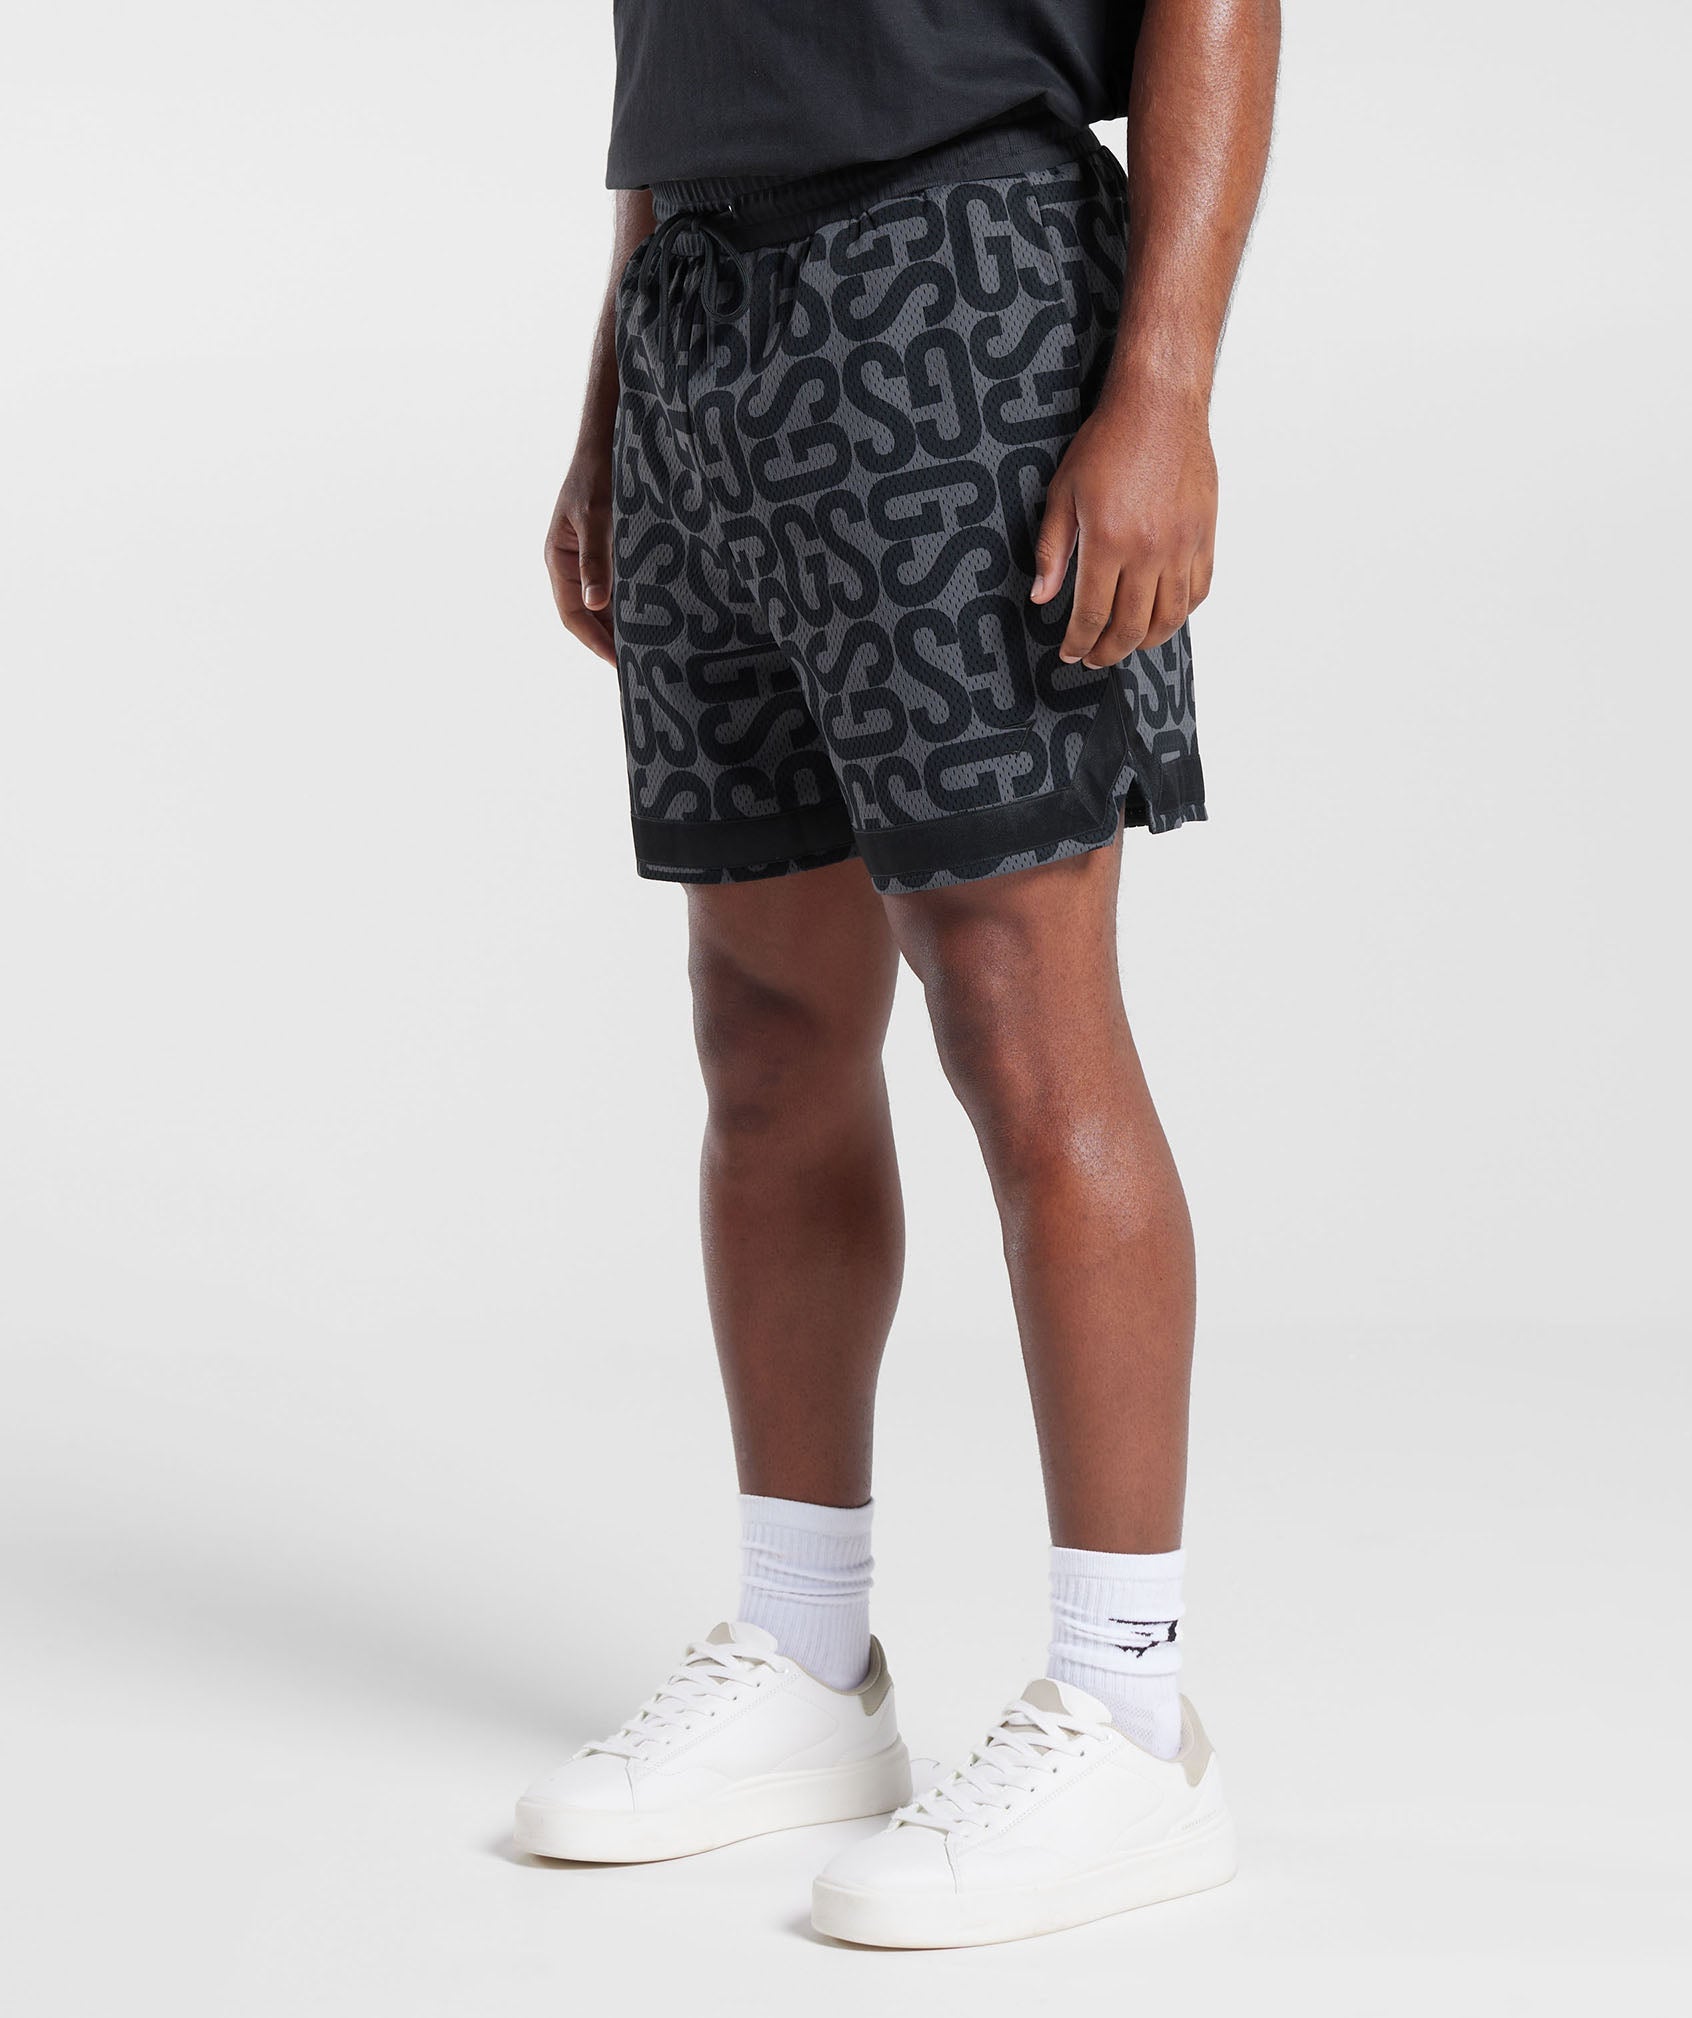 Rest Day Shorts in Black/Onyx Grey - view 3